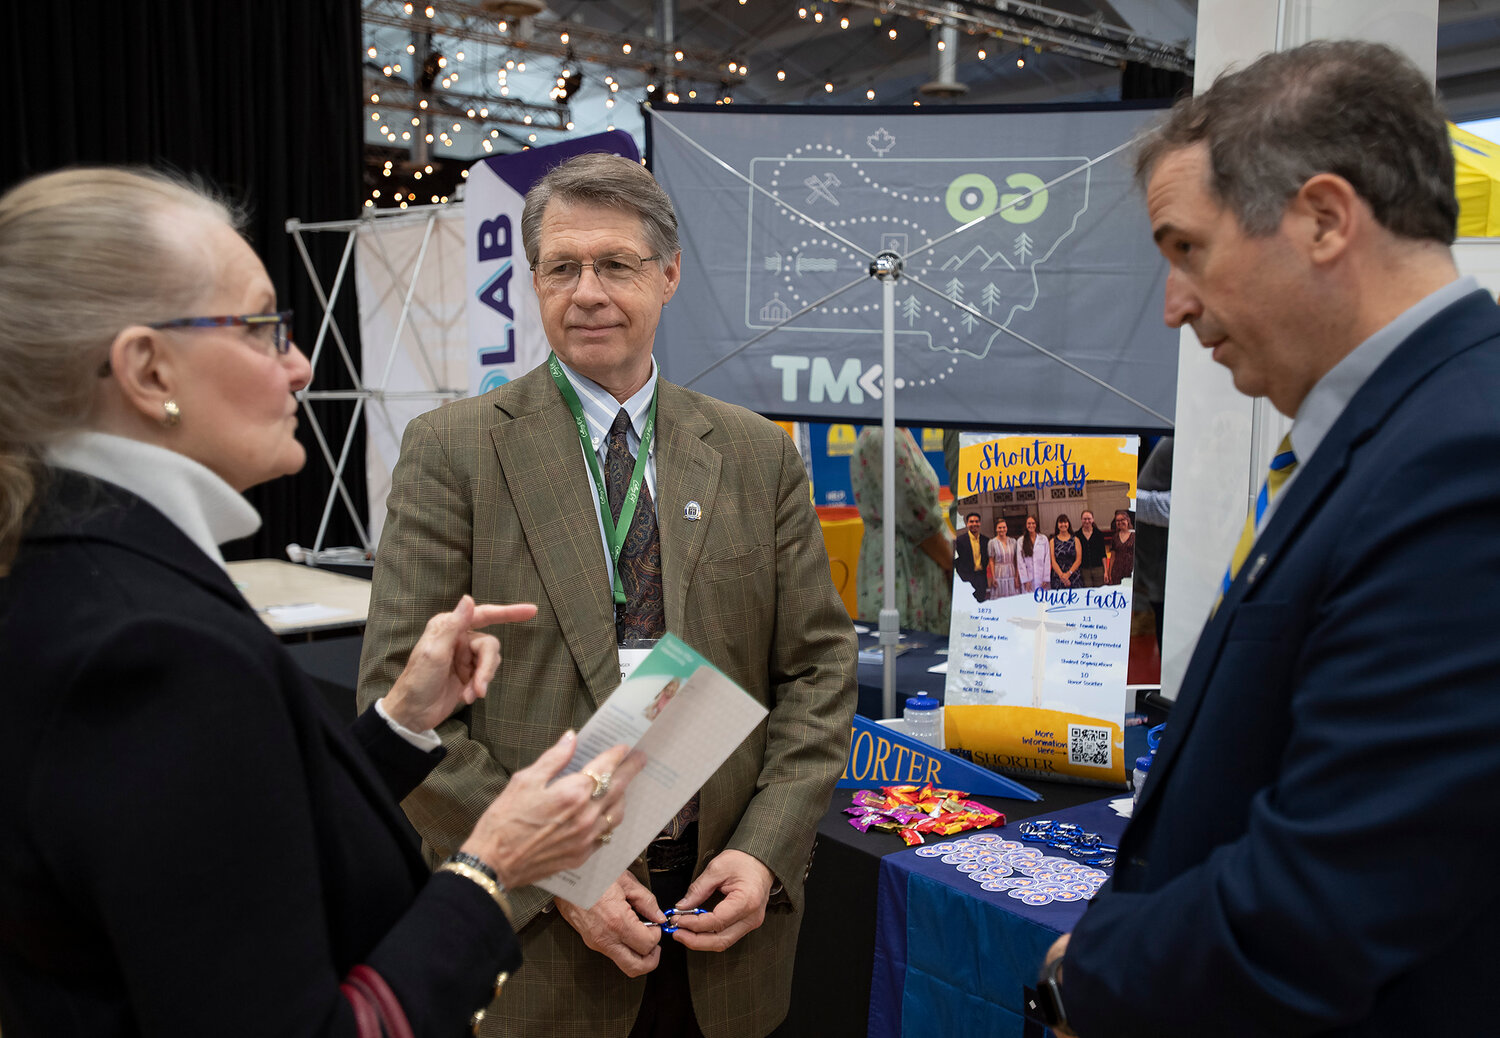 Dr. Donald Dowless, president of Shorter University, and Provost John Reams, right, speak with a messenger at the school's booth in the vendor area during the third day of the Georgia Baptist Convention's 201st annual meeting Tuesday at Church on Main in Snellville, Ga. (Index/Henry Durand)